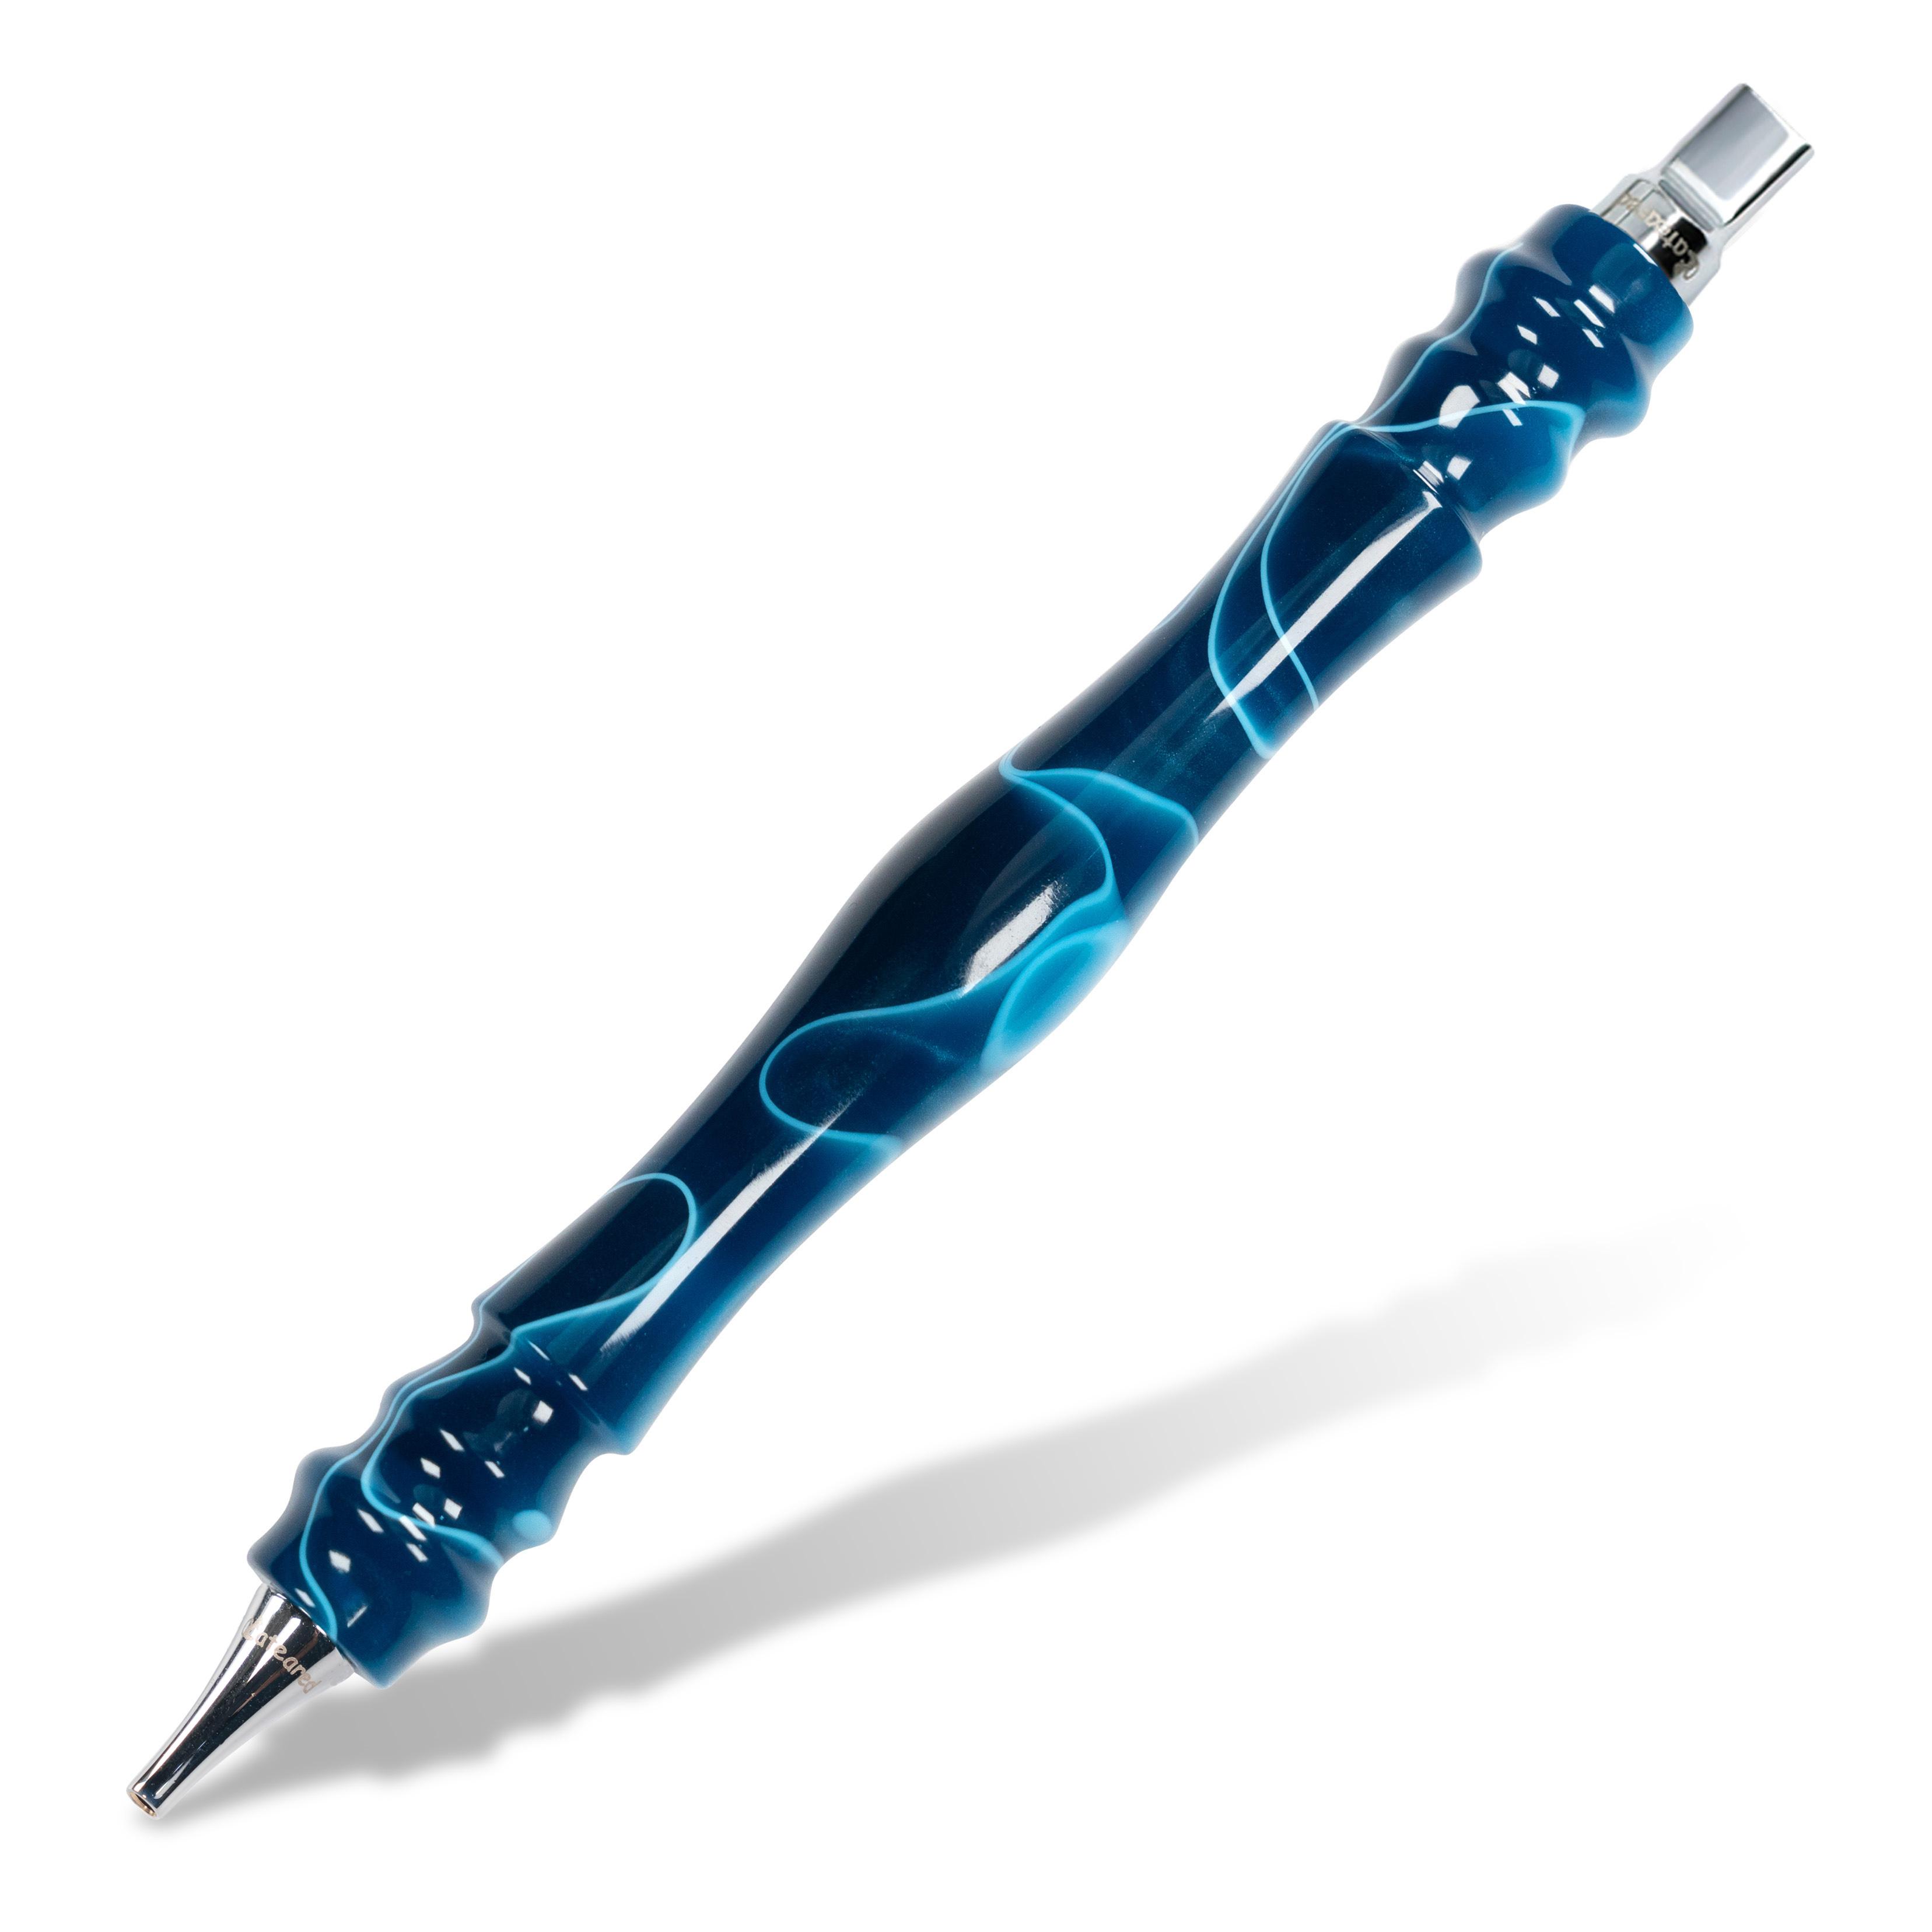 Diamond Painting Drill Pen with 6 Acrylic Tips, and Wax Storage